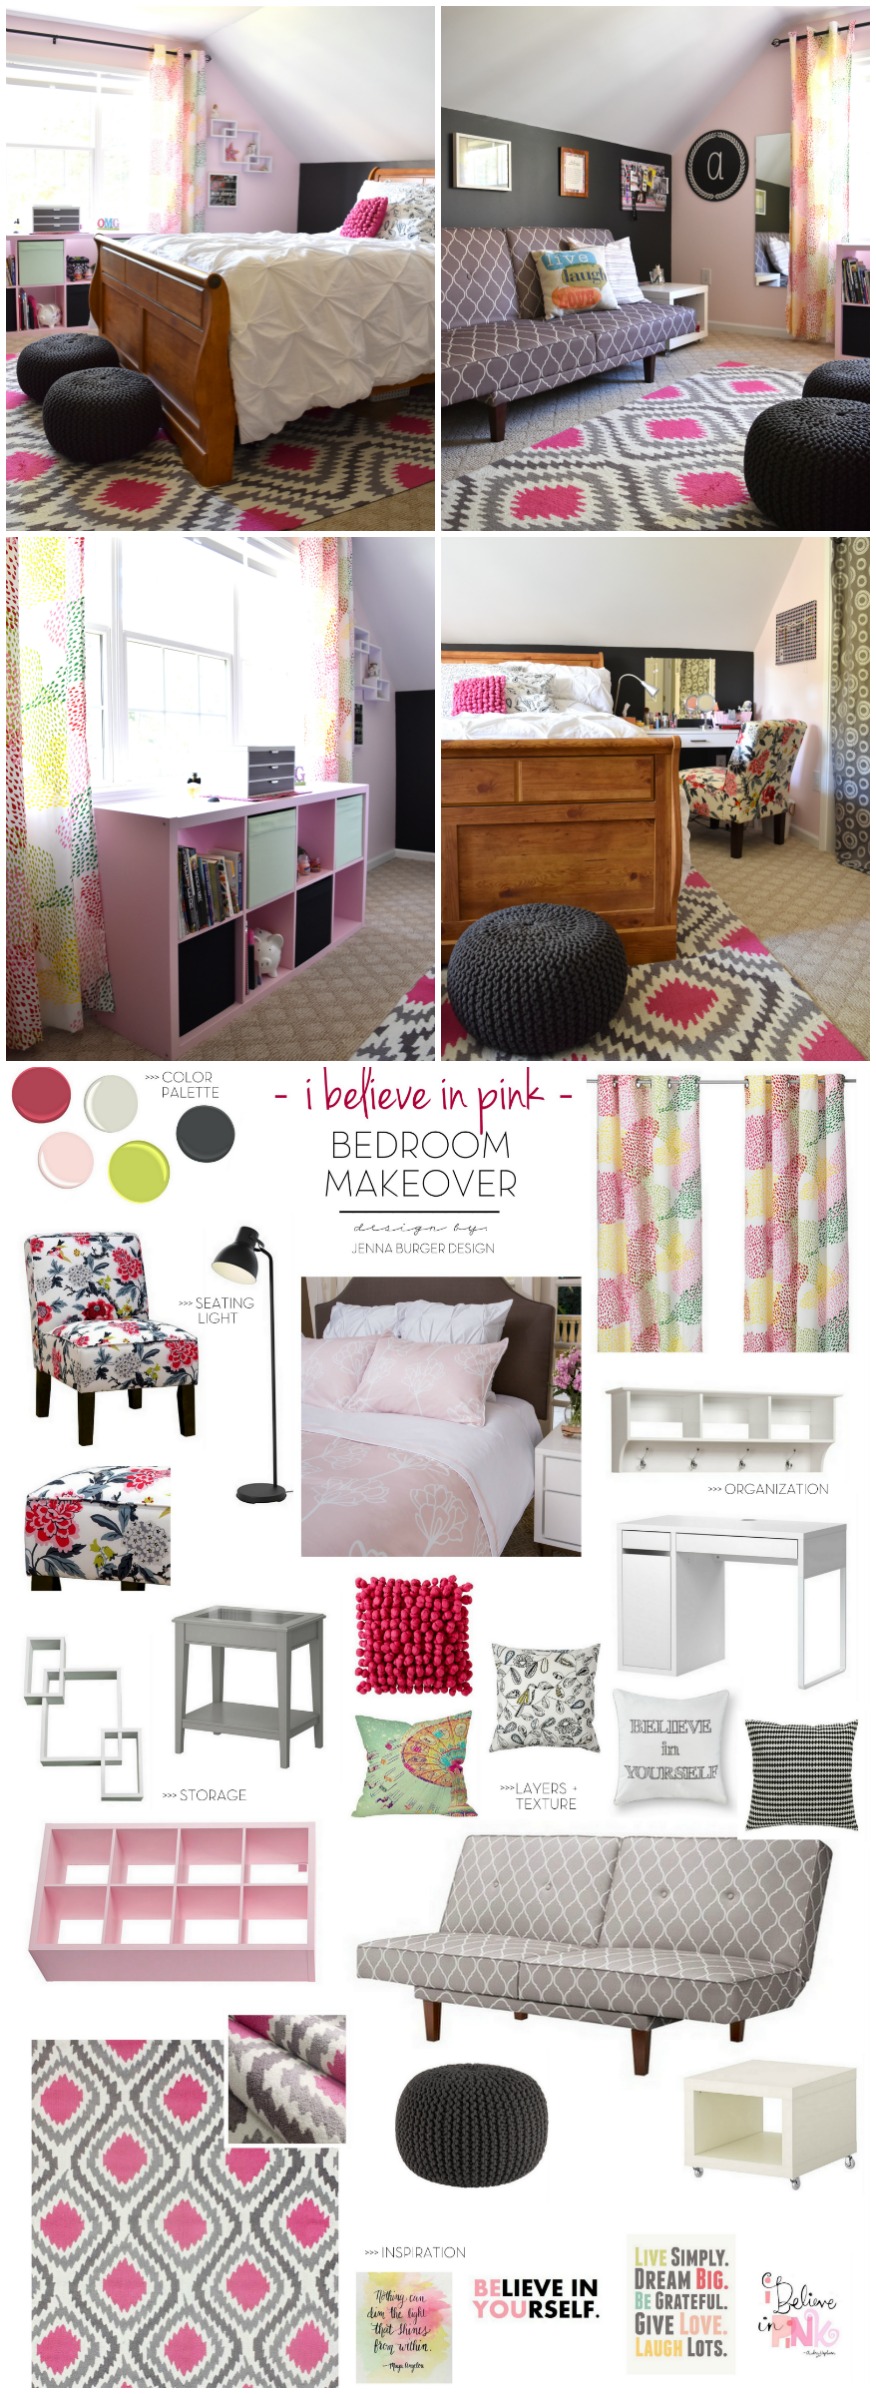 Teen Bedroom Makeover: Splashes of Pink mixed with charcoal + citrine revamped this bedroom into a teen hangout oasis. Be inspired by all the storage + new look this room got! Design by www.JennaBurger.com